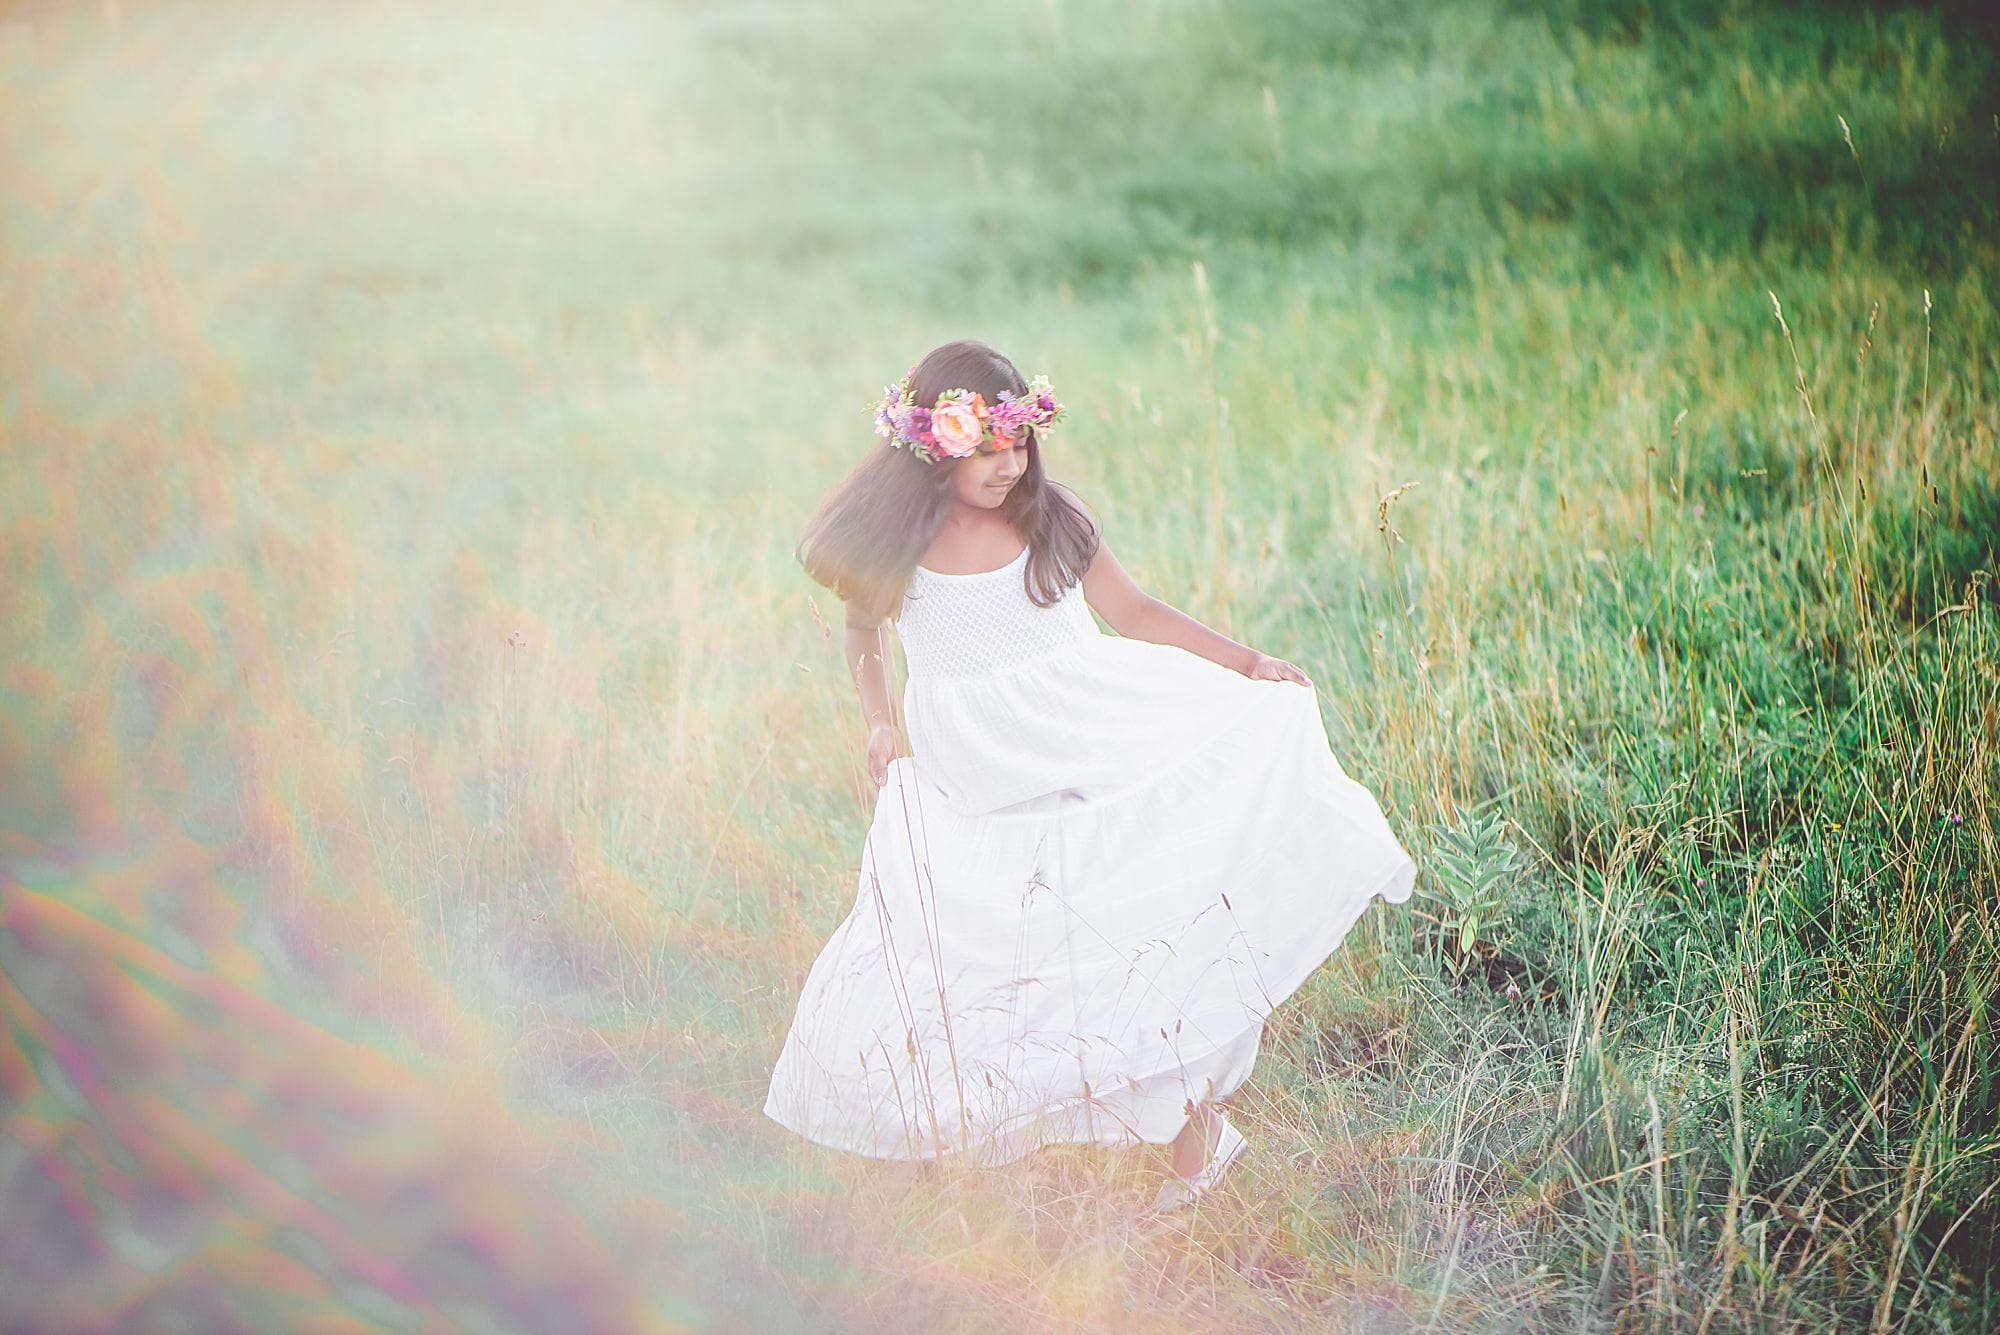 Girl in long white dress and flower crown outside in a grassy meadow with sunflare